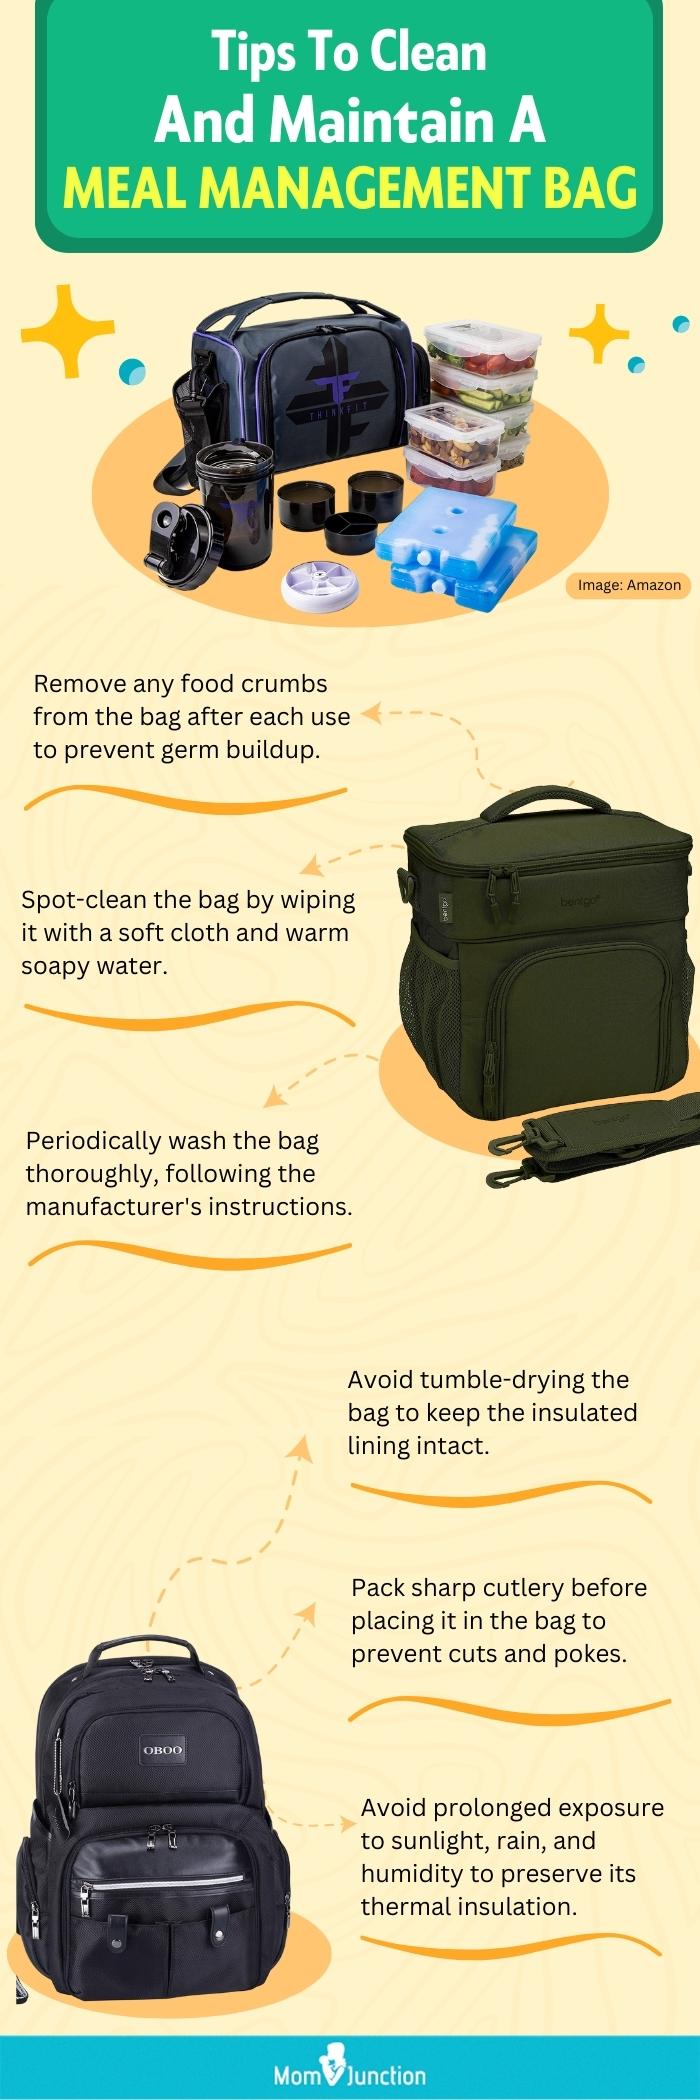 Tips To Clean And Maintain A Meal Management Bag (infographic)